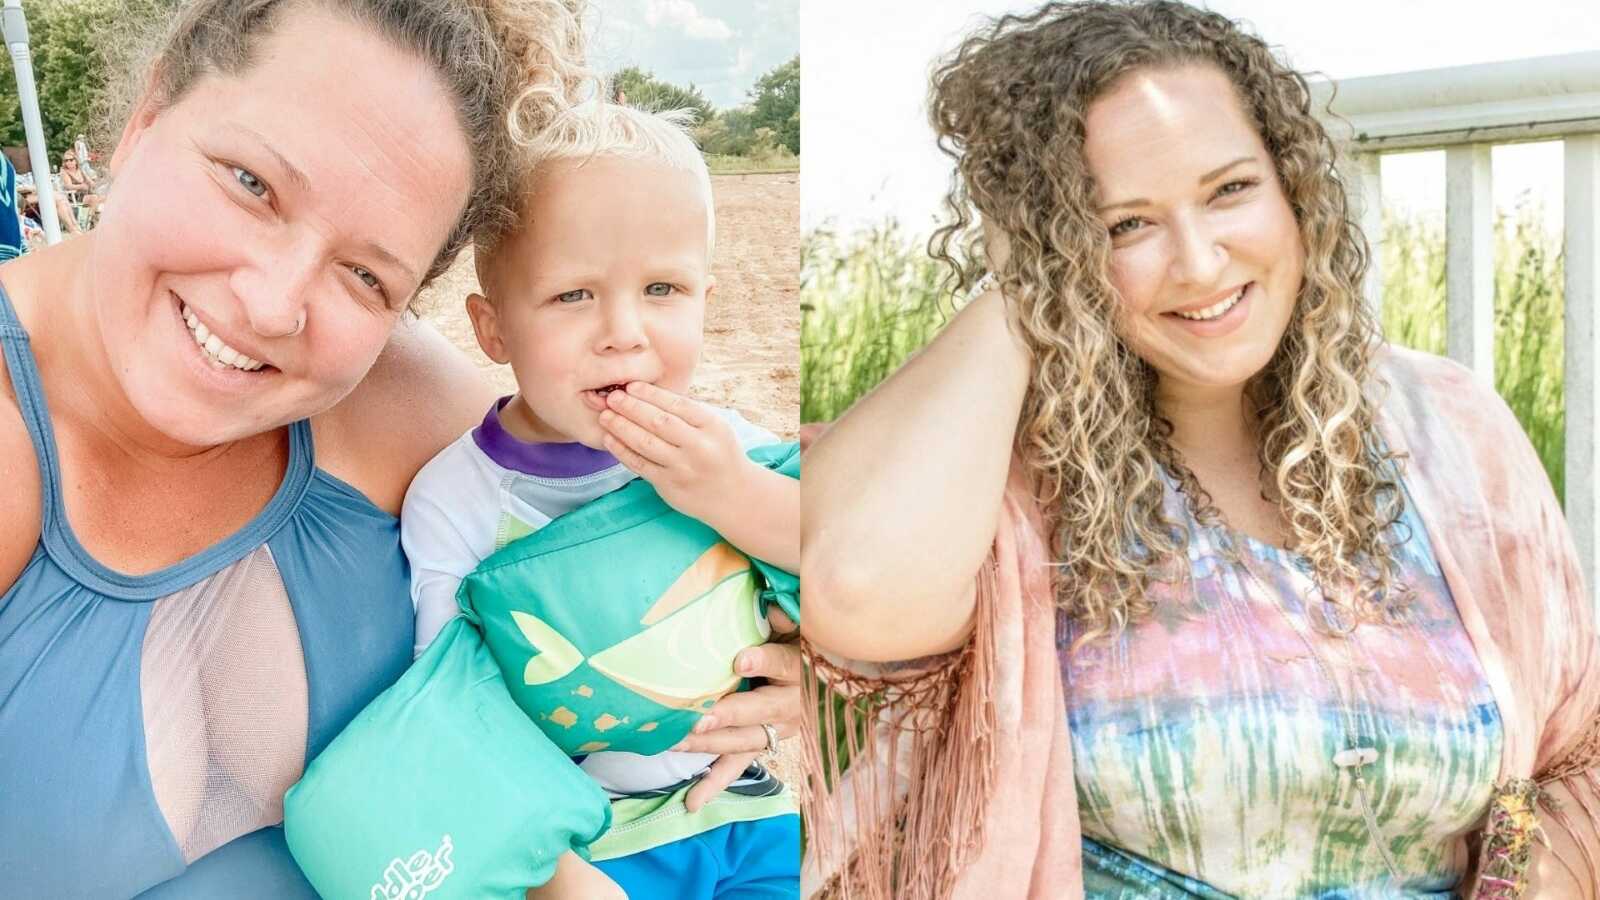 Woman and mom of 2 shares photos of her smiling and embracing her natural body and looks